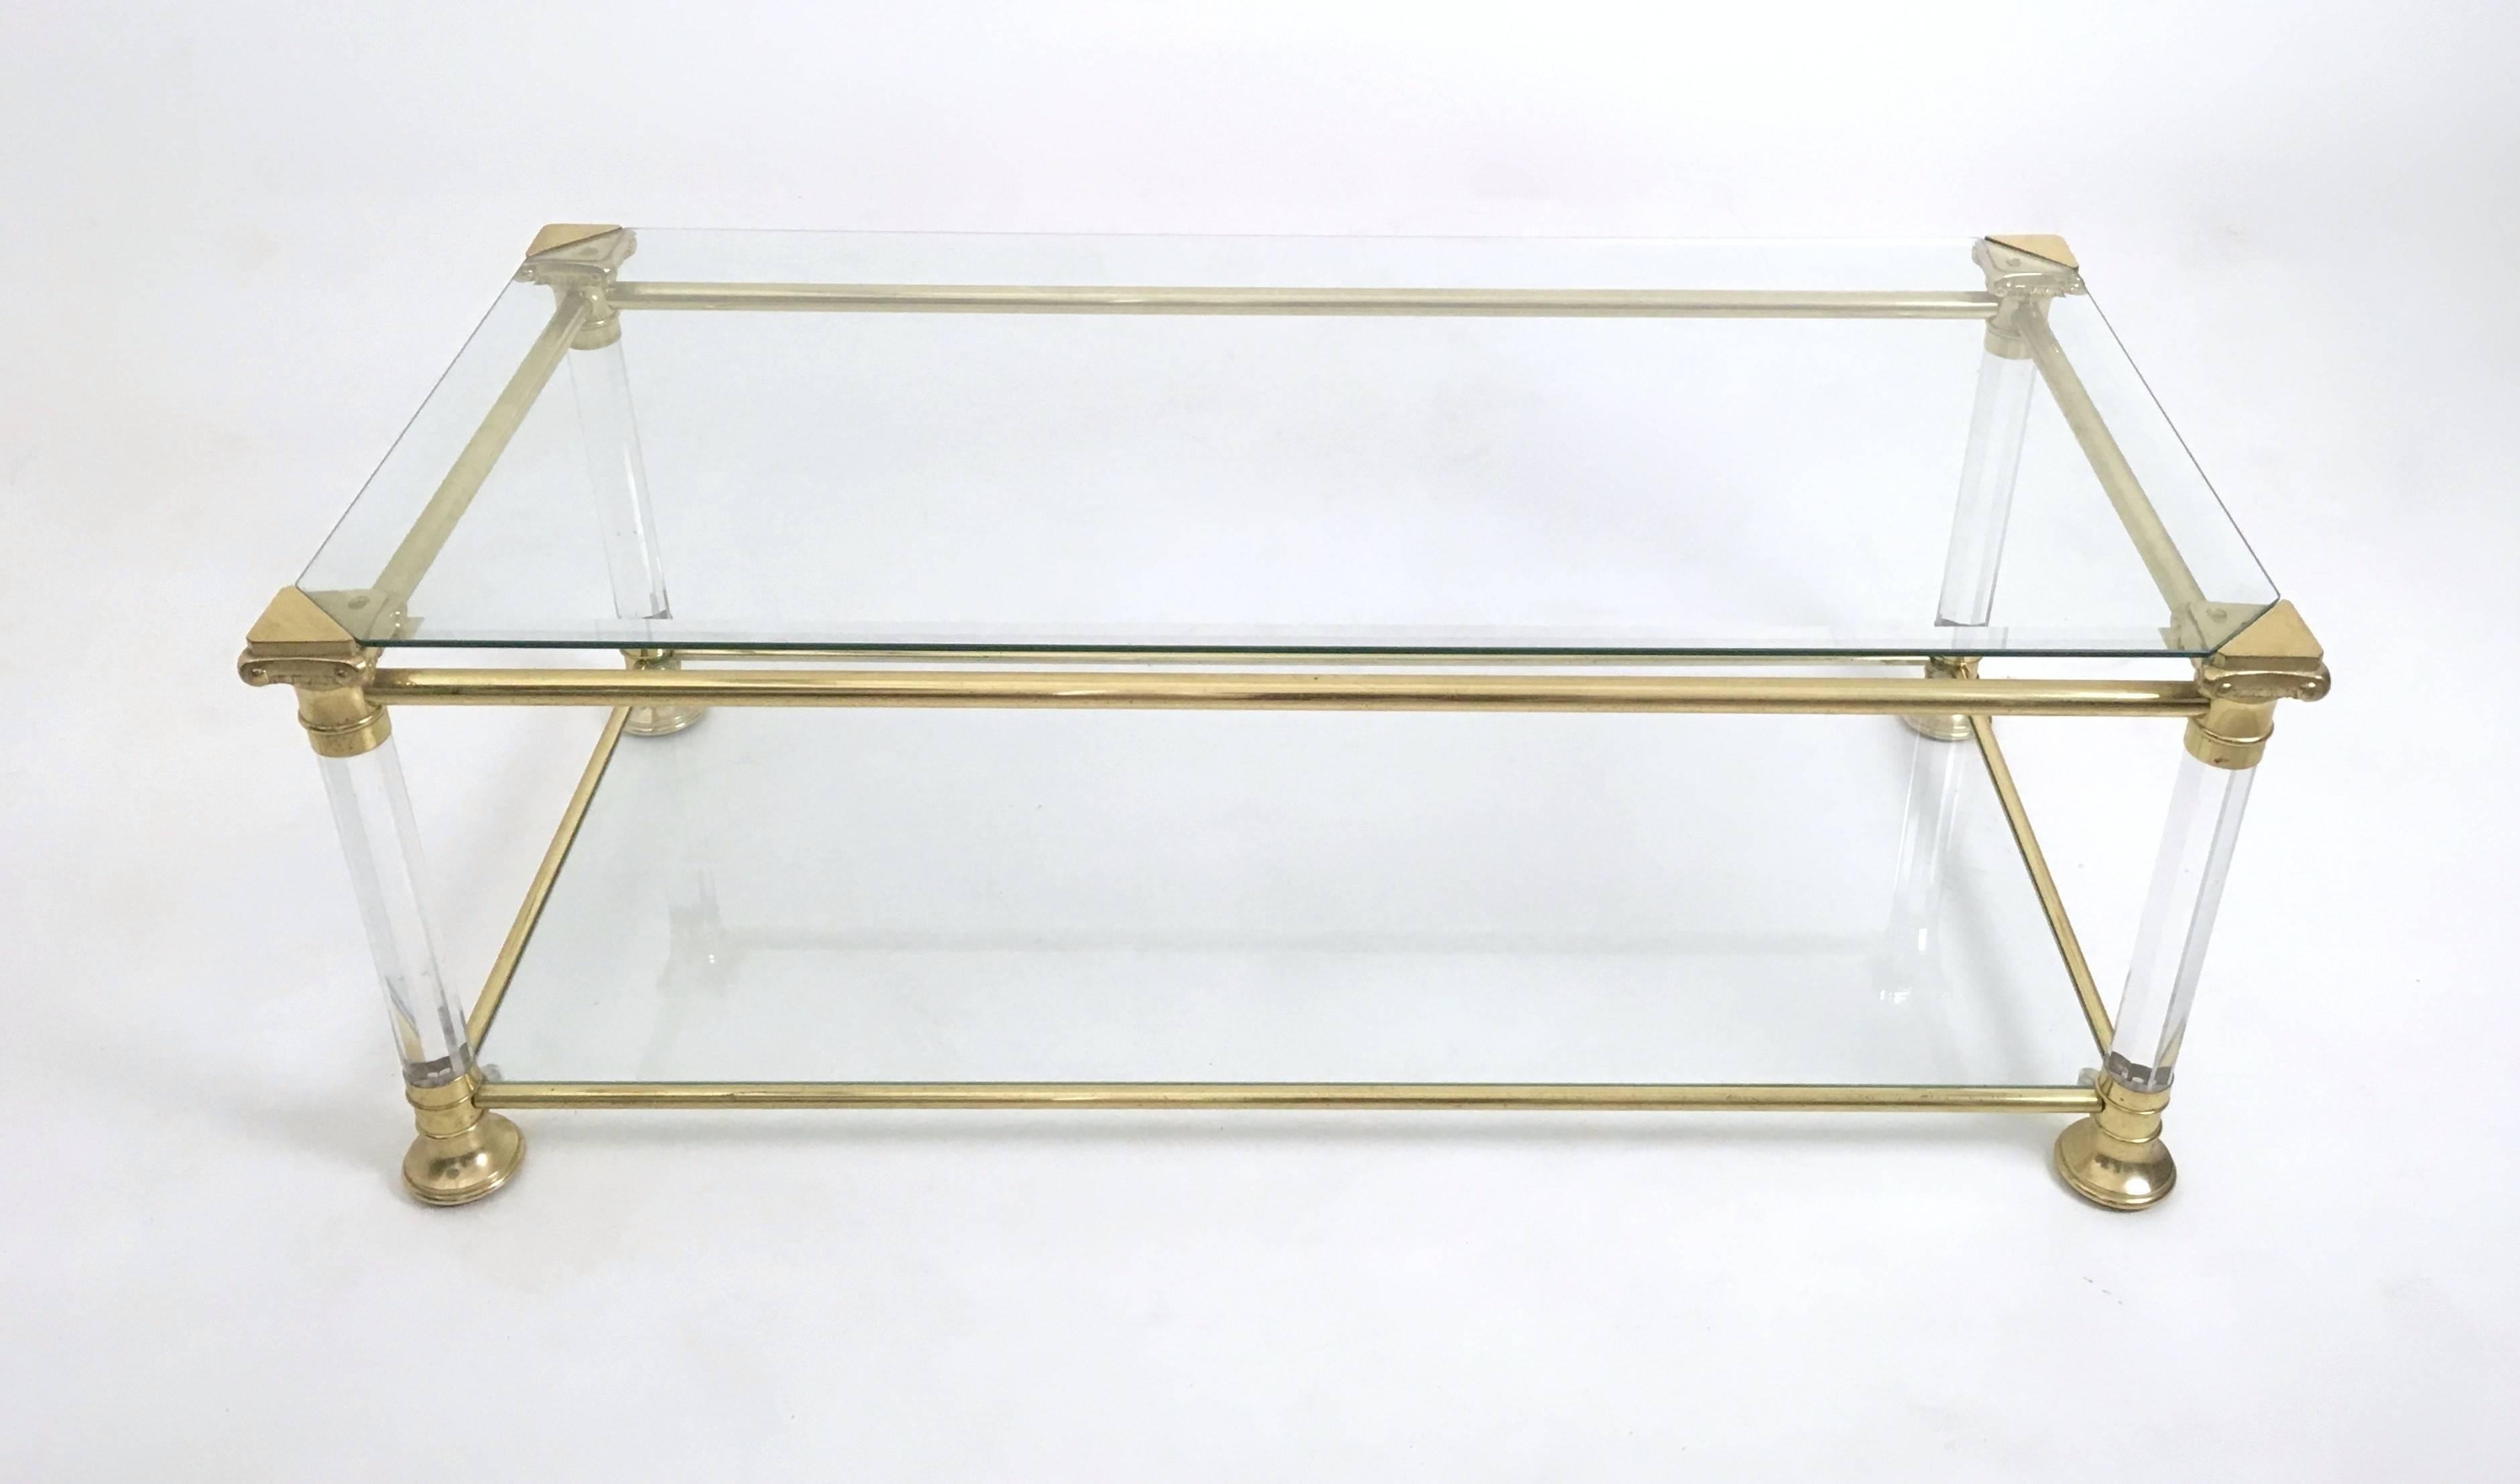 Made in Italy, 1980s. 
This coffee table features a plexiglass and brass frame with two beveled glass shelves. 
It is a vintage piece, therefore it might show slight traces of use, but it can be considered as in very good original condition and